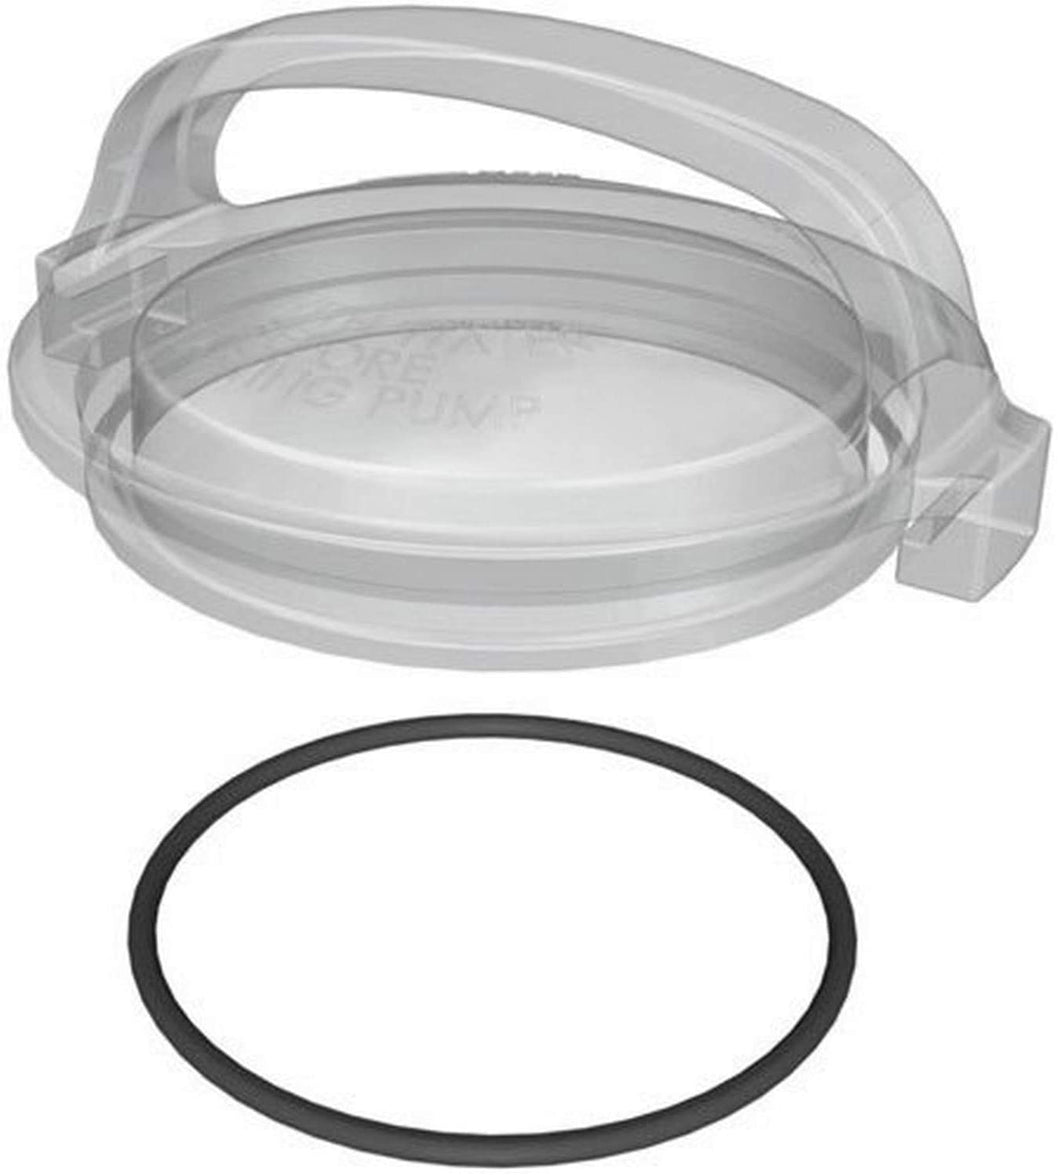 Hayward Ultra Pro Pump Cover with O-Ring